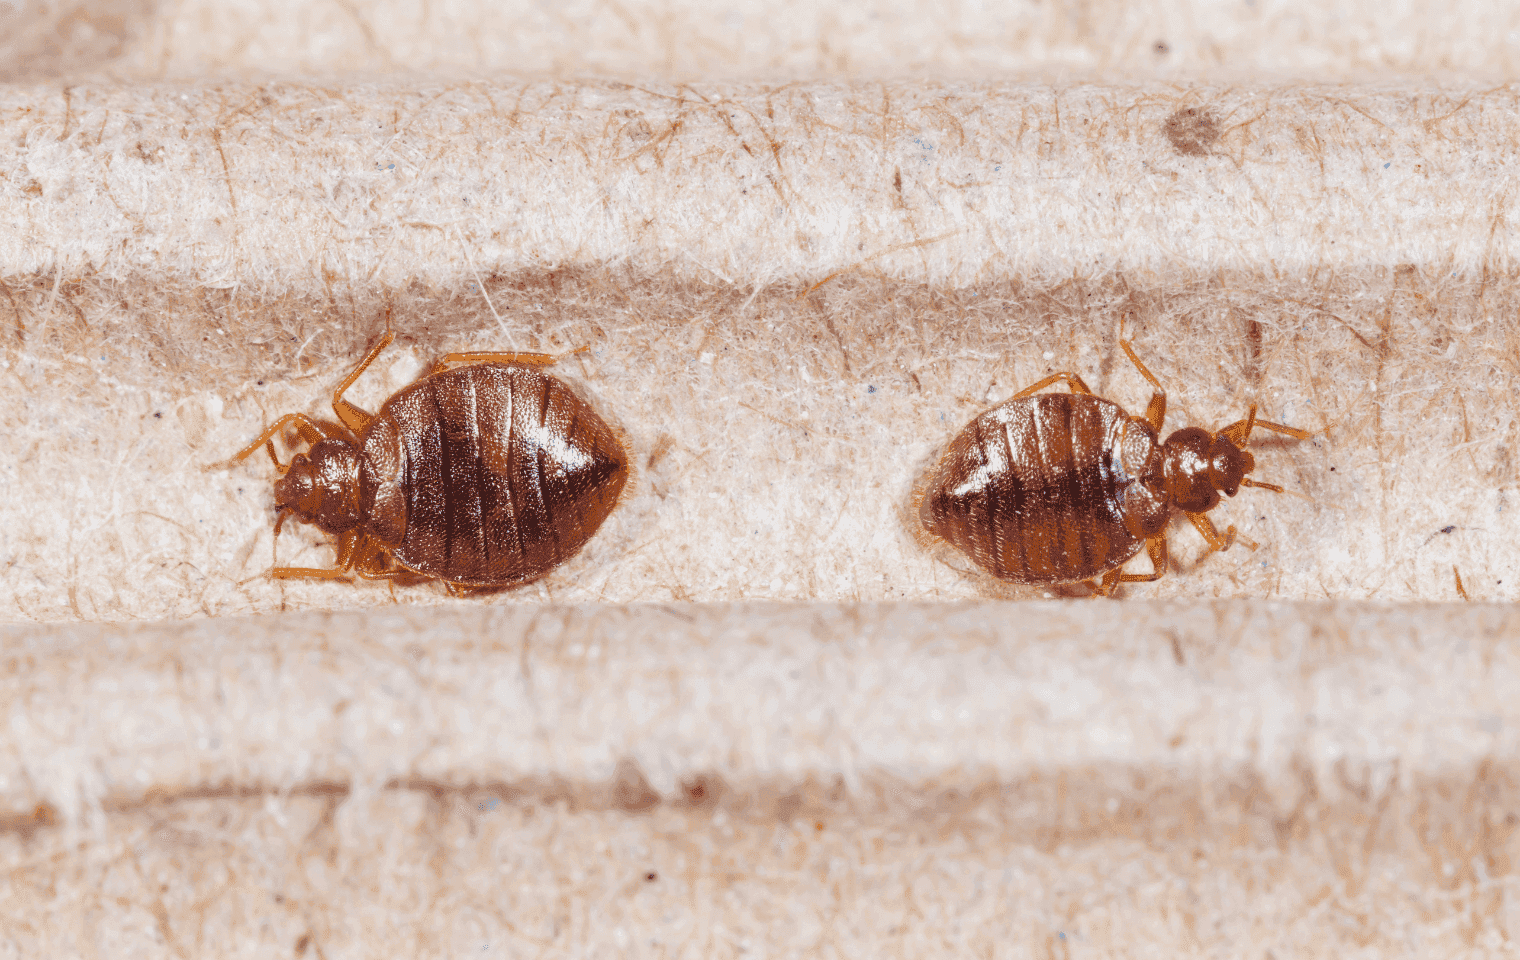 two bed bugs on a mattress